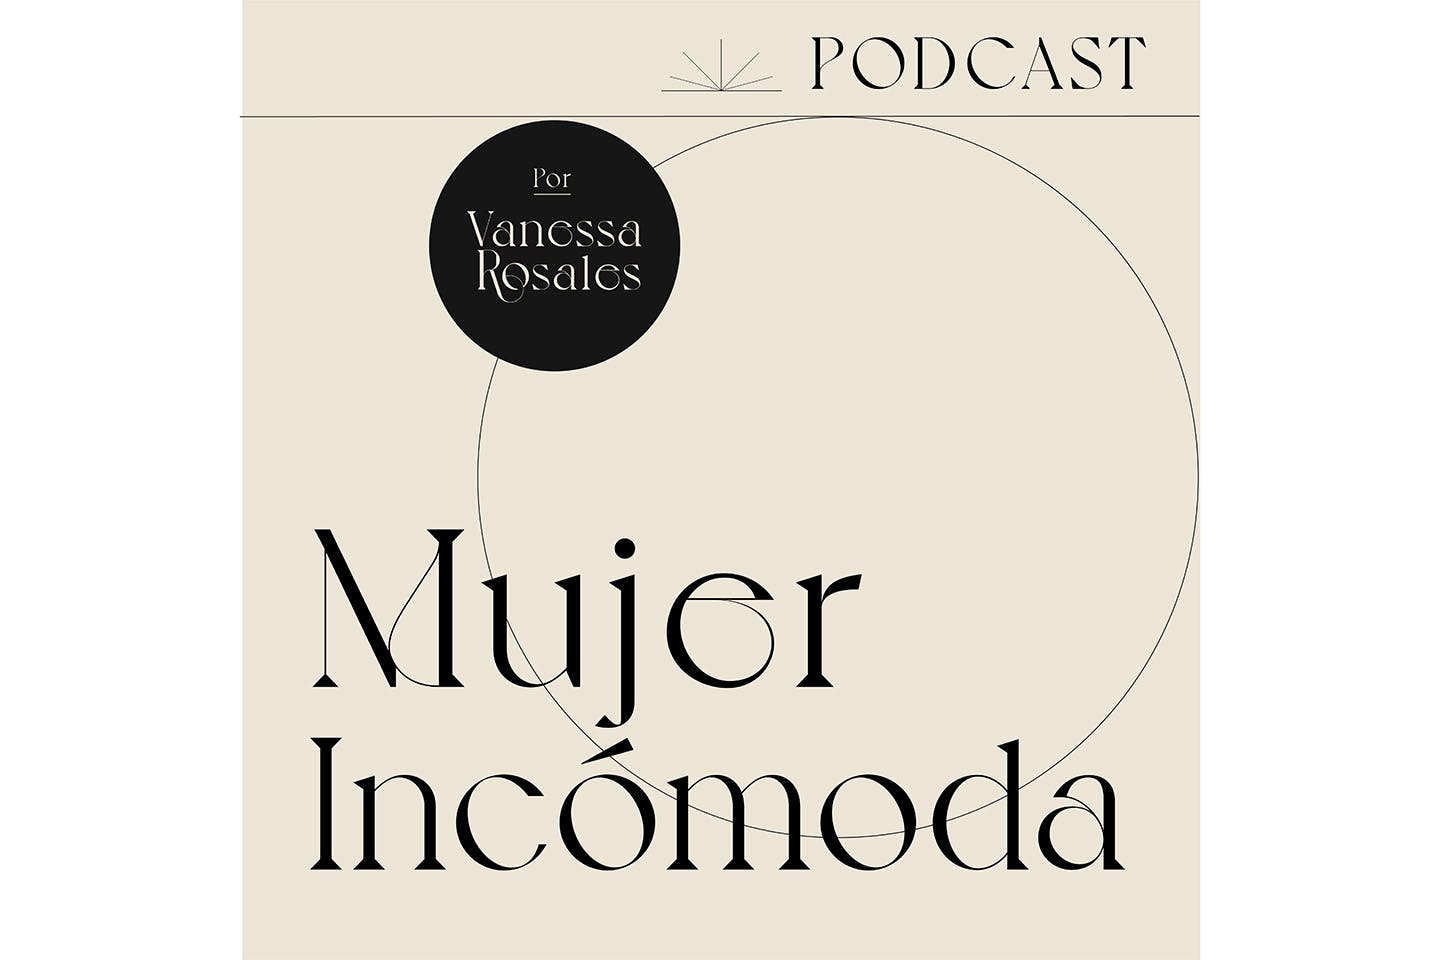 The official podcast cover for Rosales’ podcast and book, Mujer incómoda (Uncomfortable Woman).